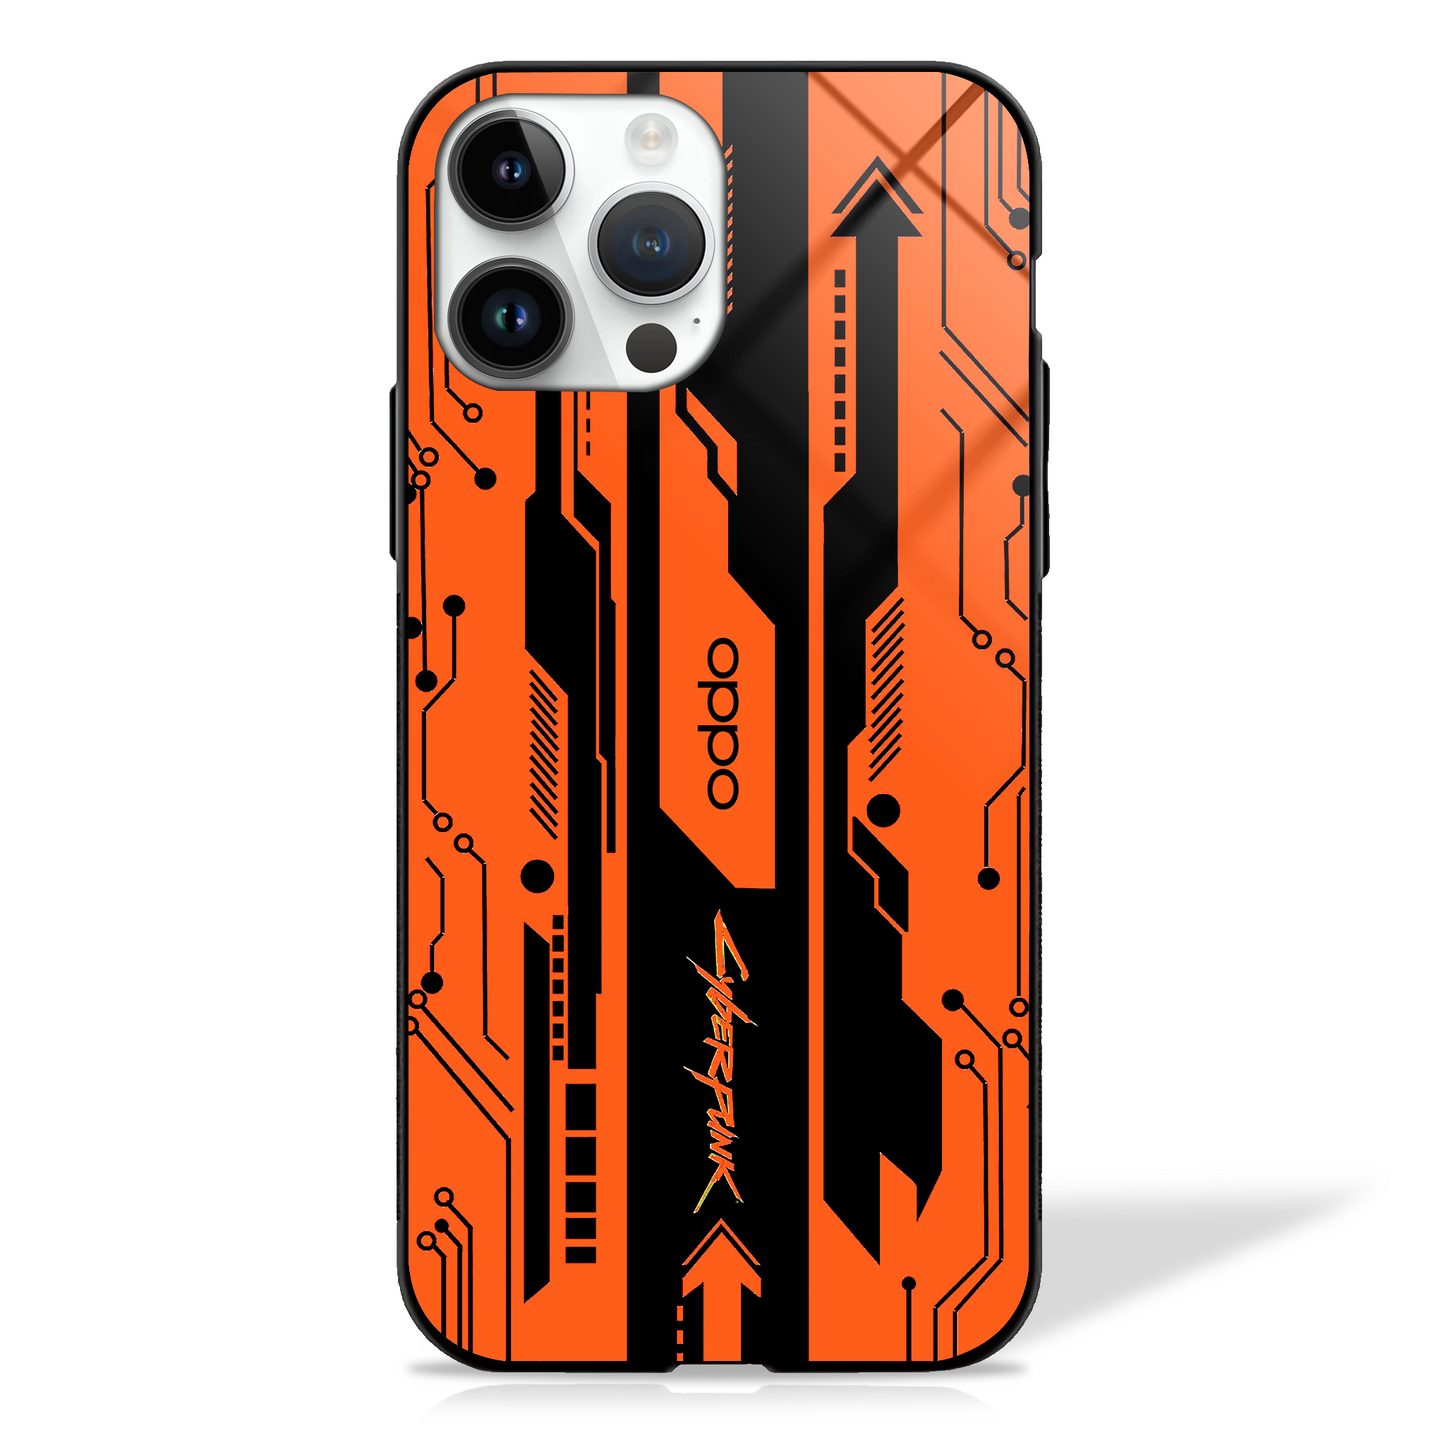 Gaming Abstract Theme GLASS CASES (Orange, Yellow, Black, Red & White)